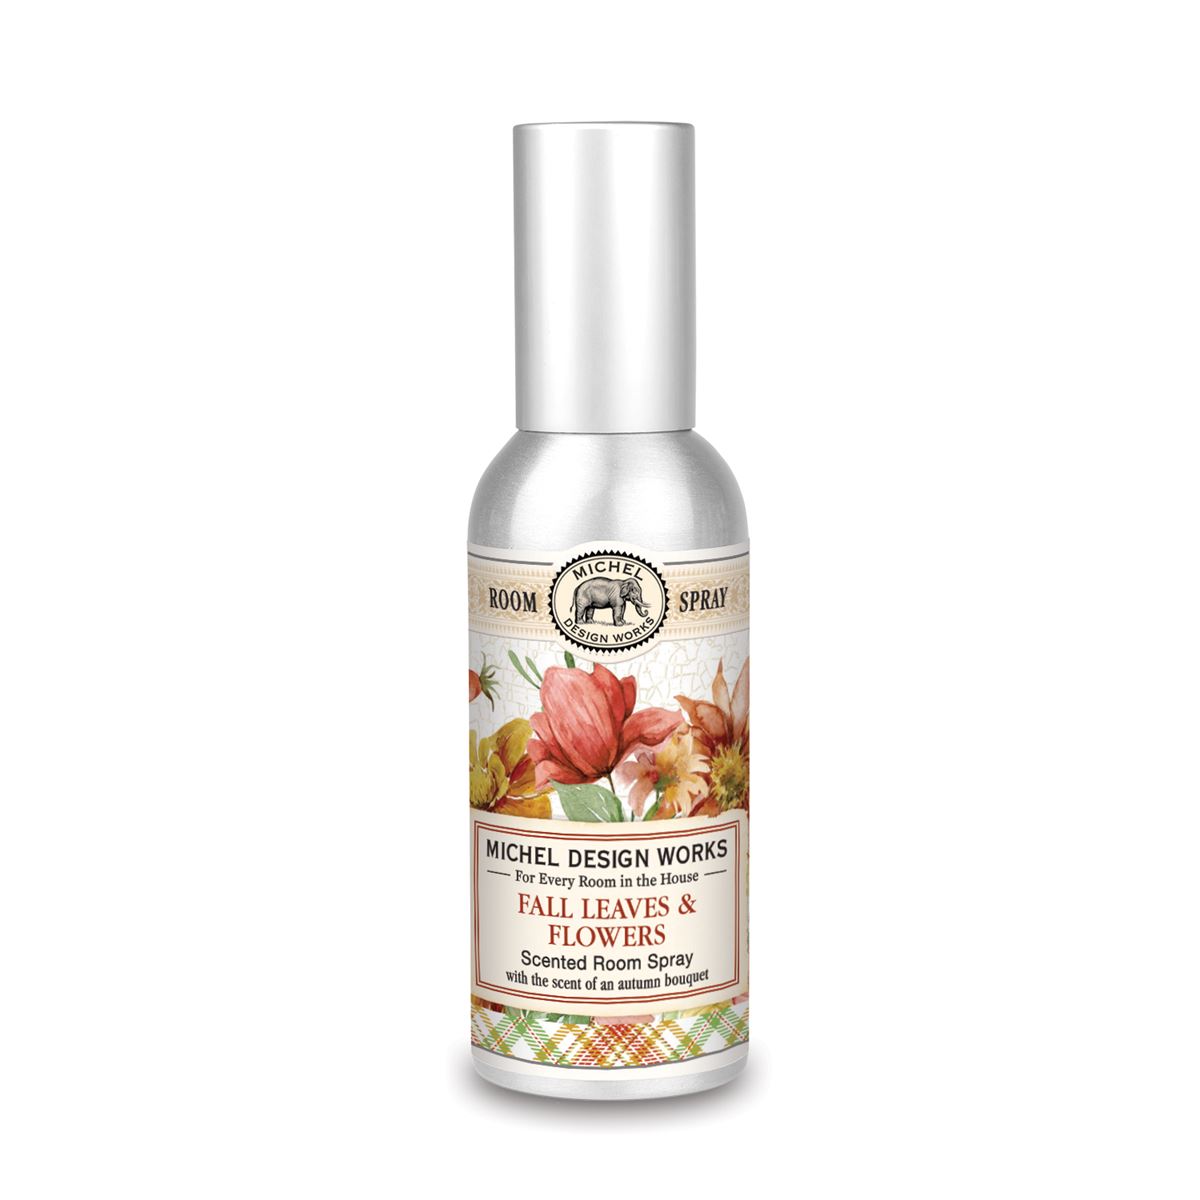 Fall Leaves & Flowers Room Spray by Michel Design Works